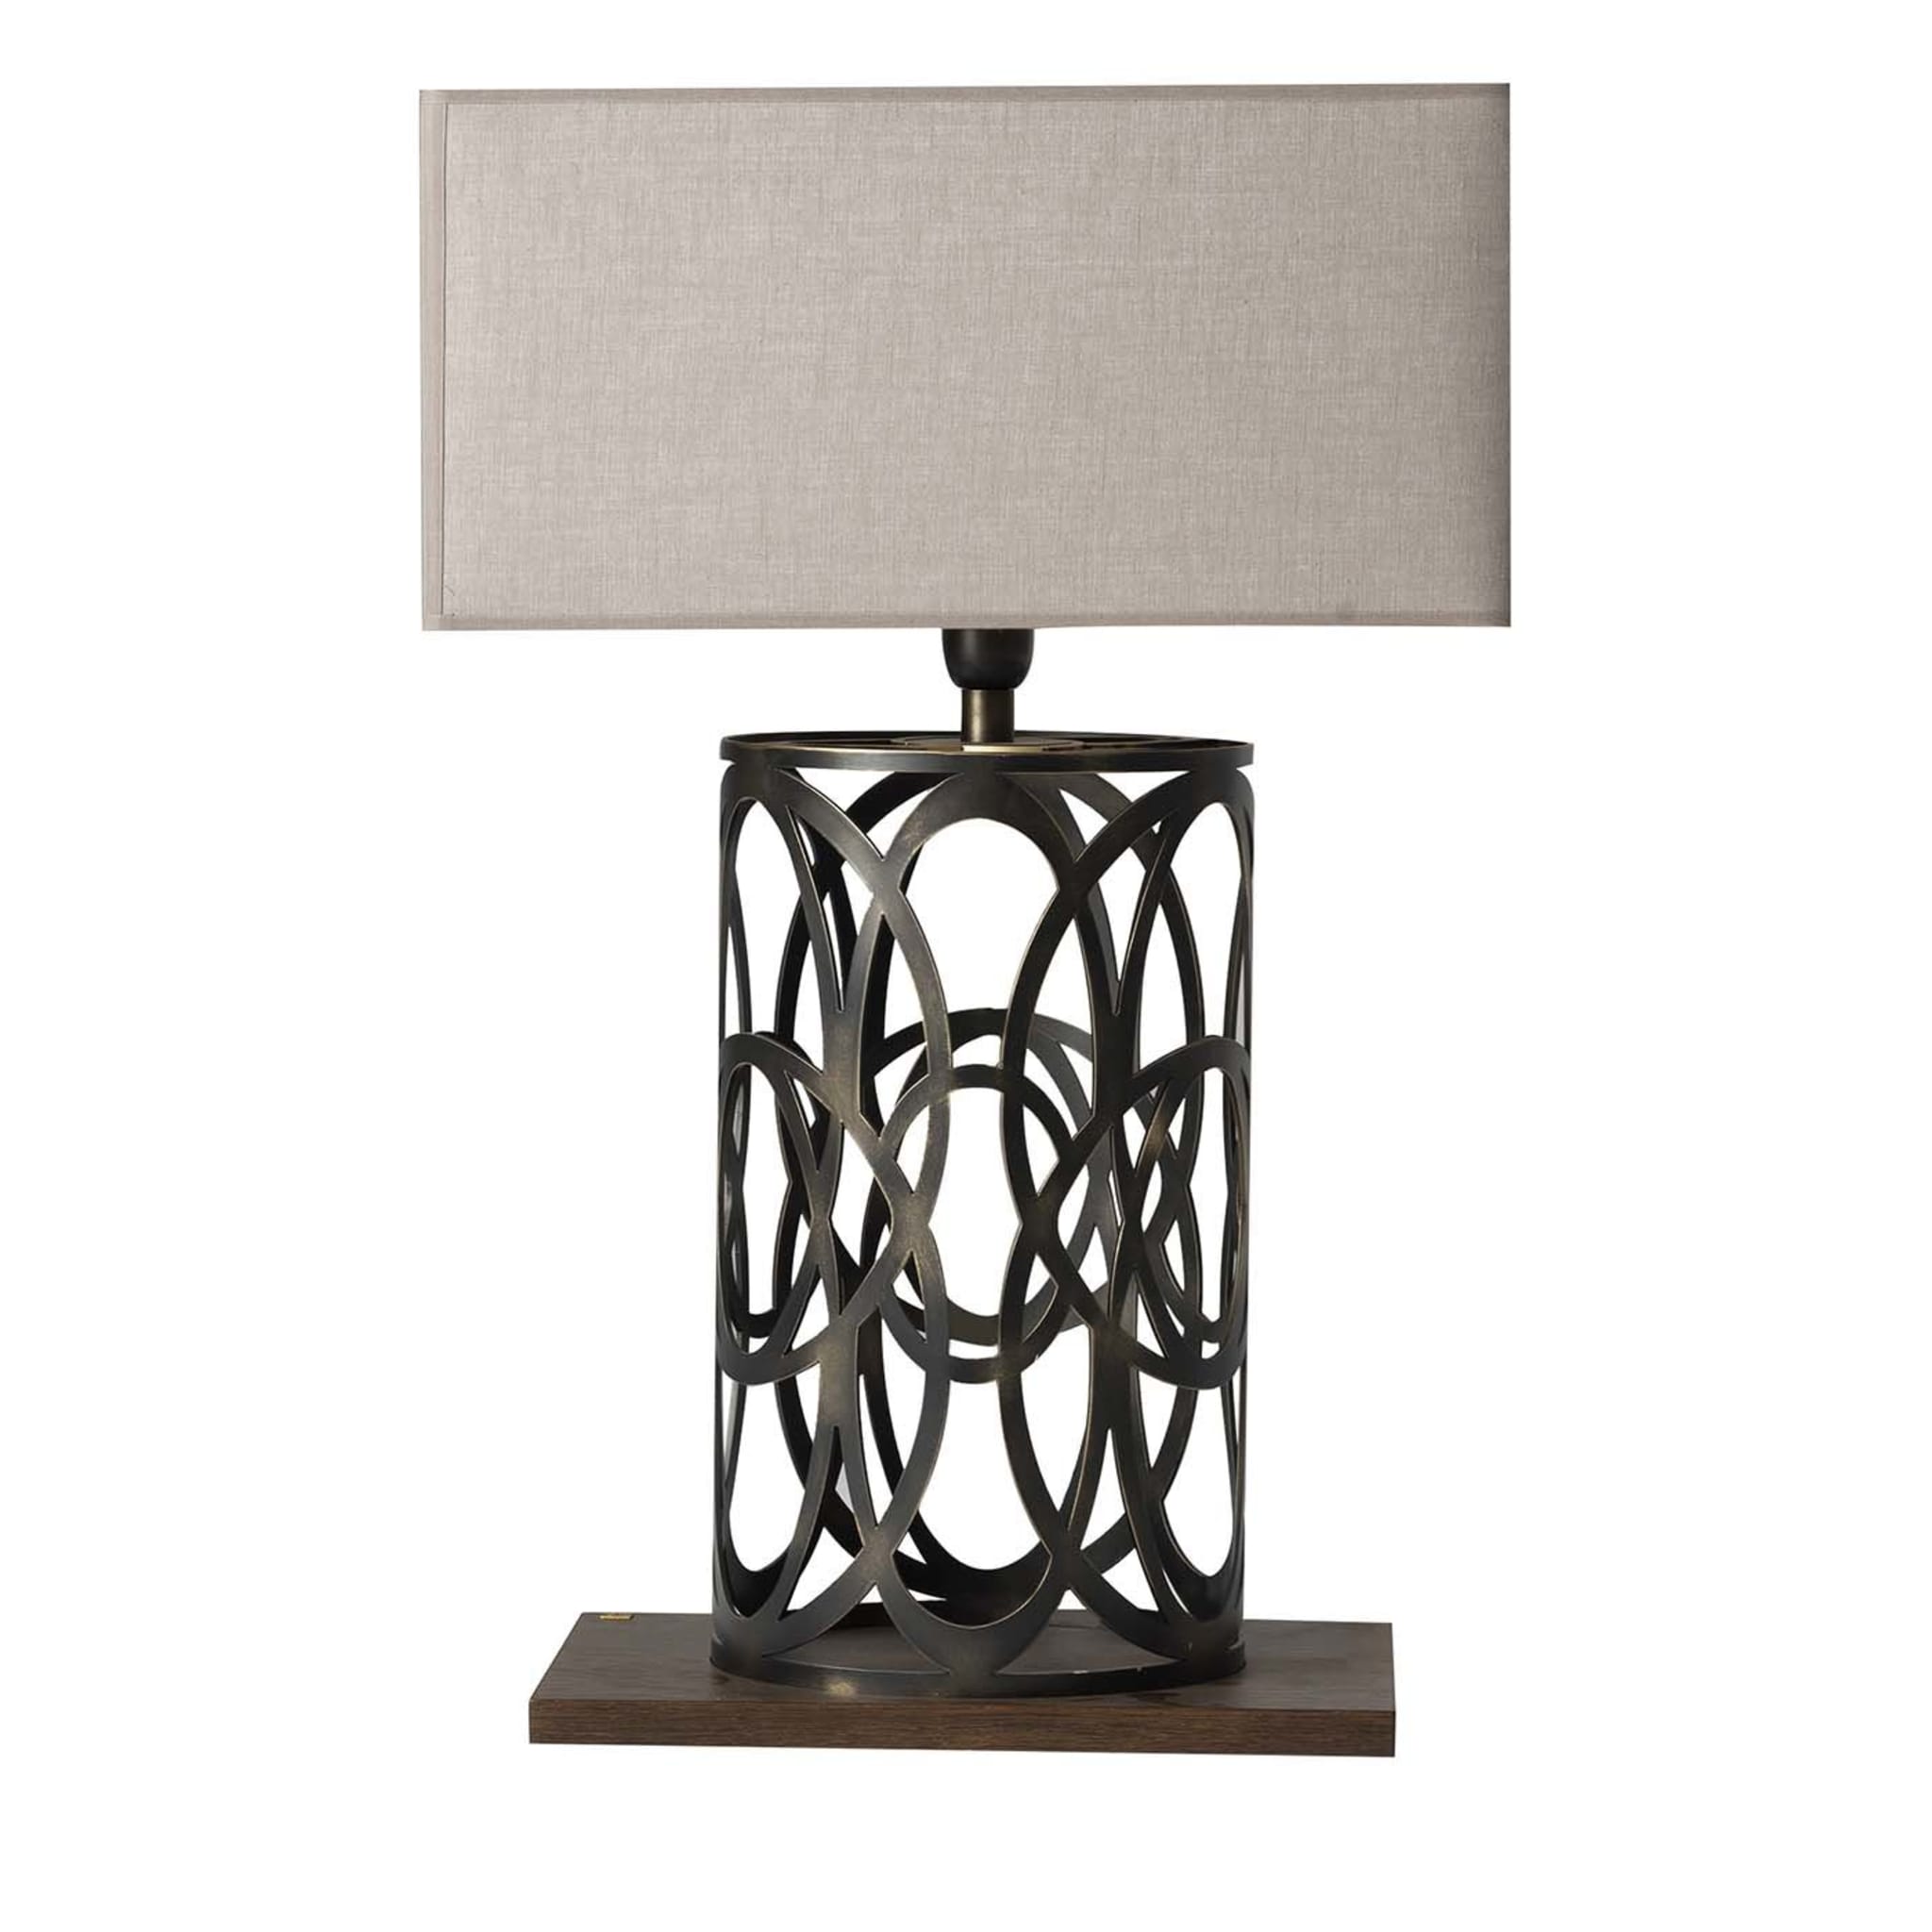 Violante Table Lamp Tribeca Collection by Marco and Giulio Mantellassi - Main view